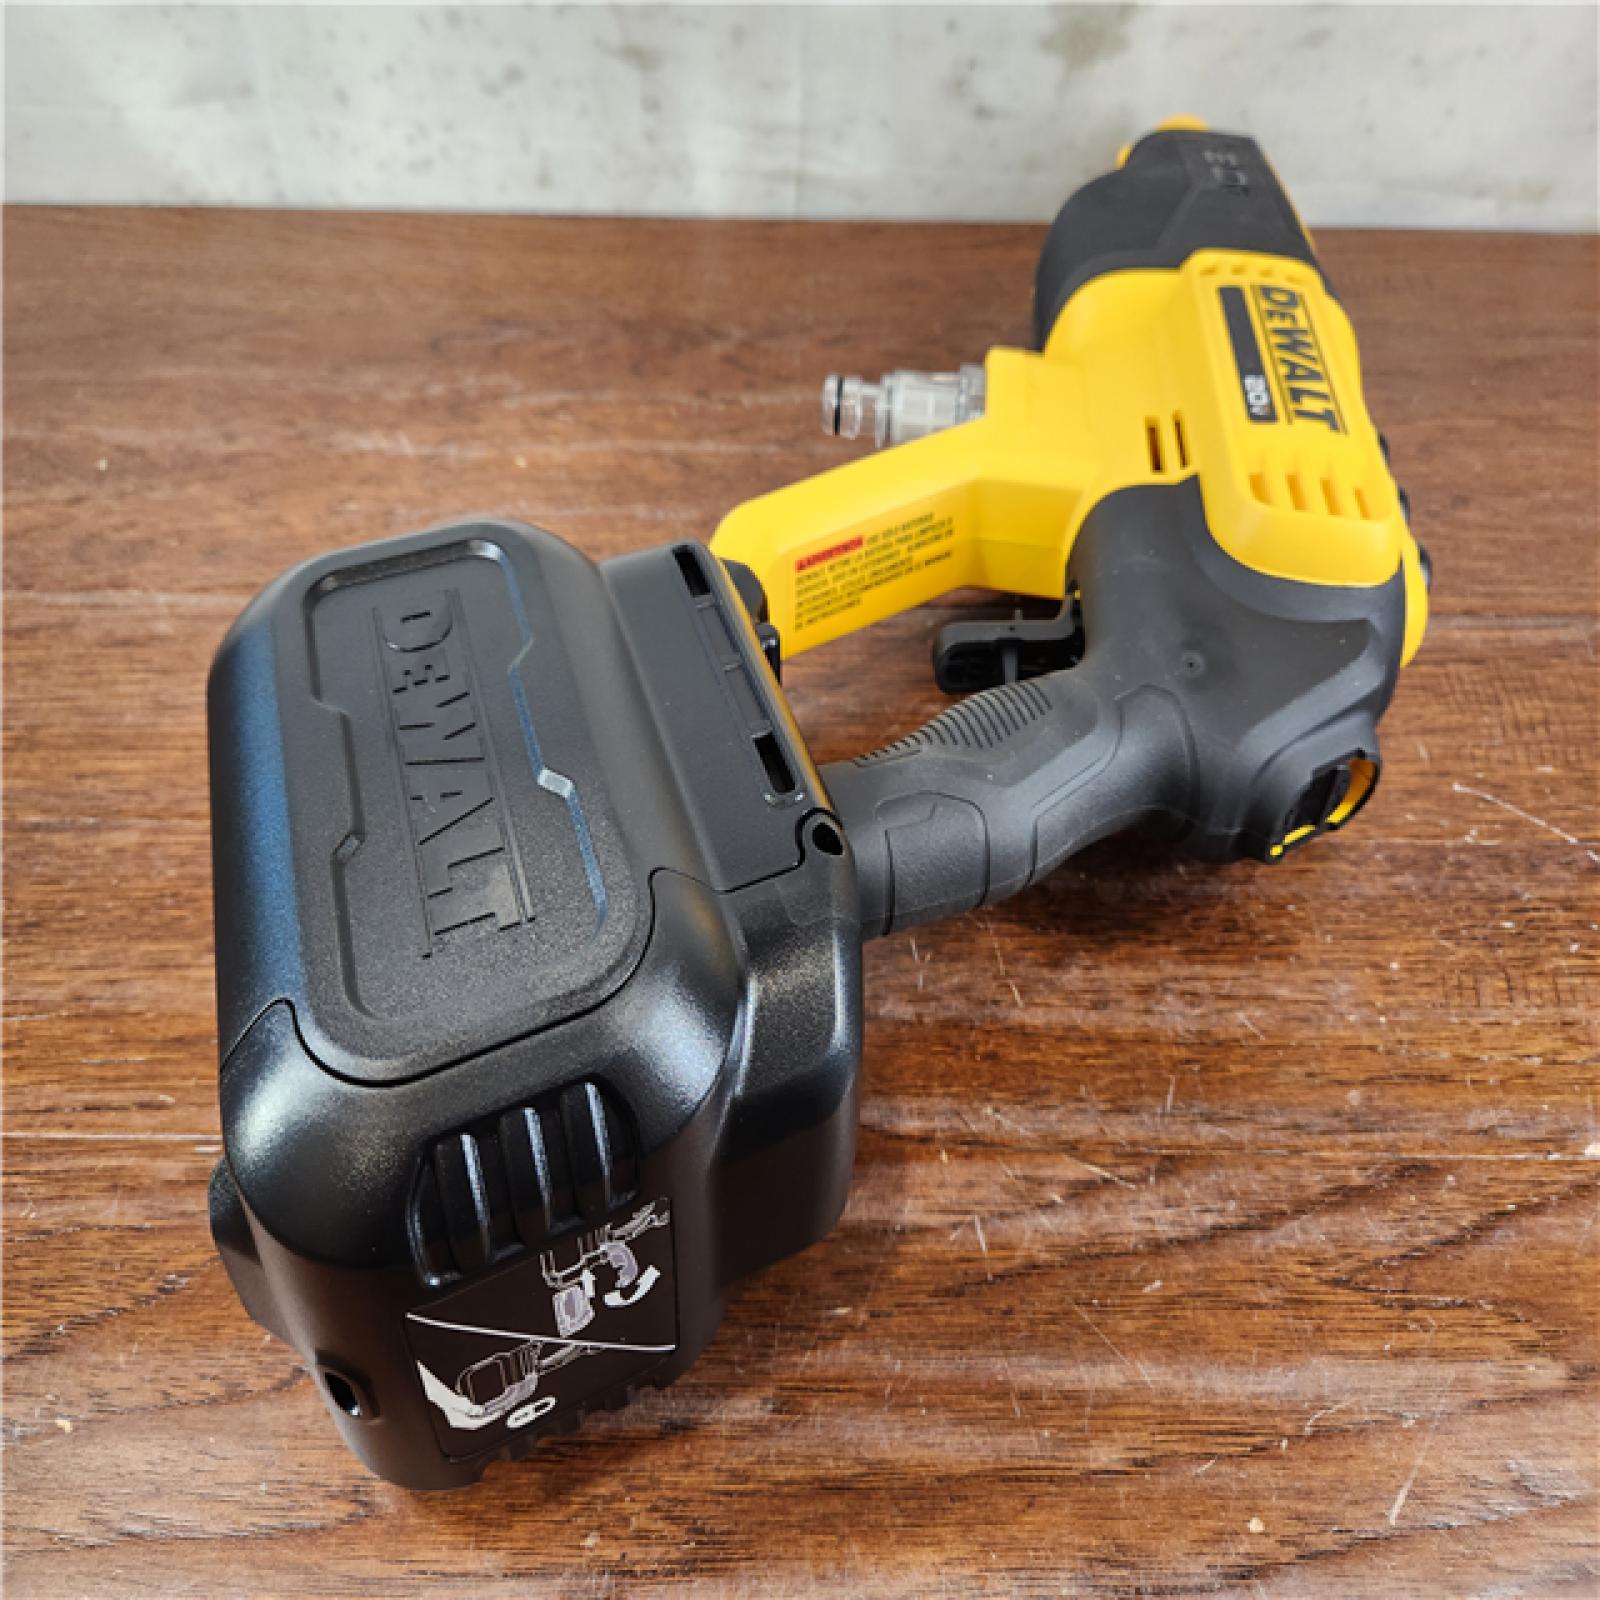 AS-IS Dewalt 20V MAX Brushless Cordless Power Cleaner w/ 4 Nozzles (Tool-Only)